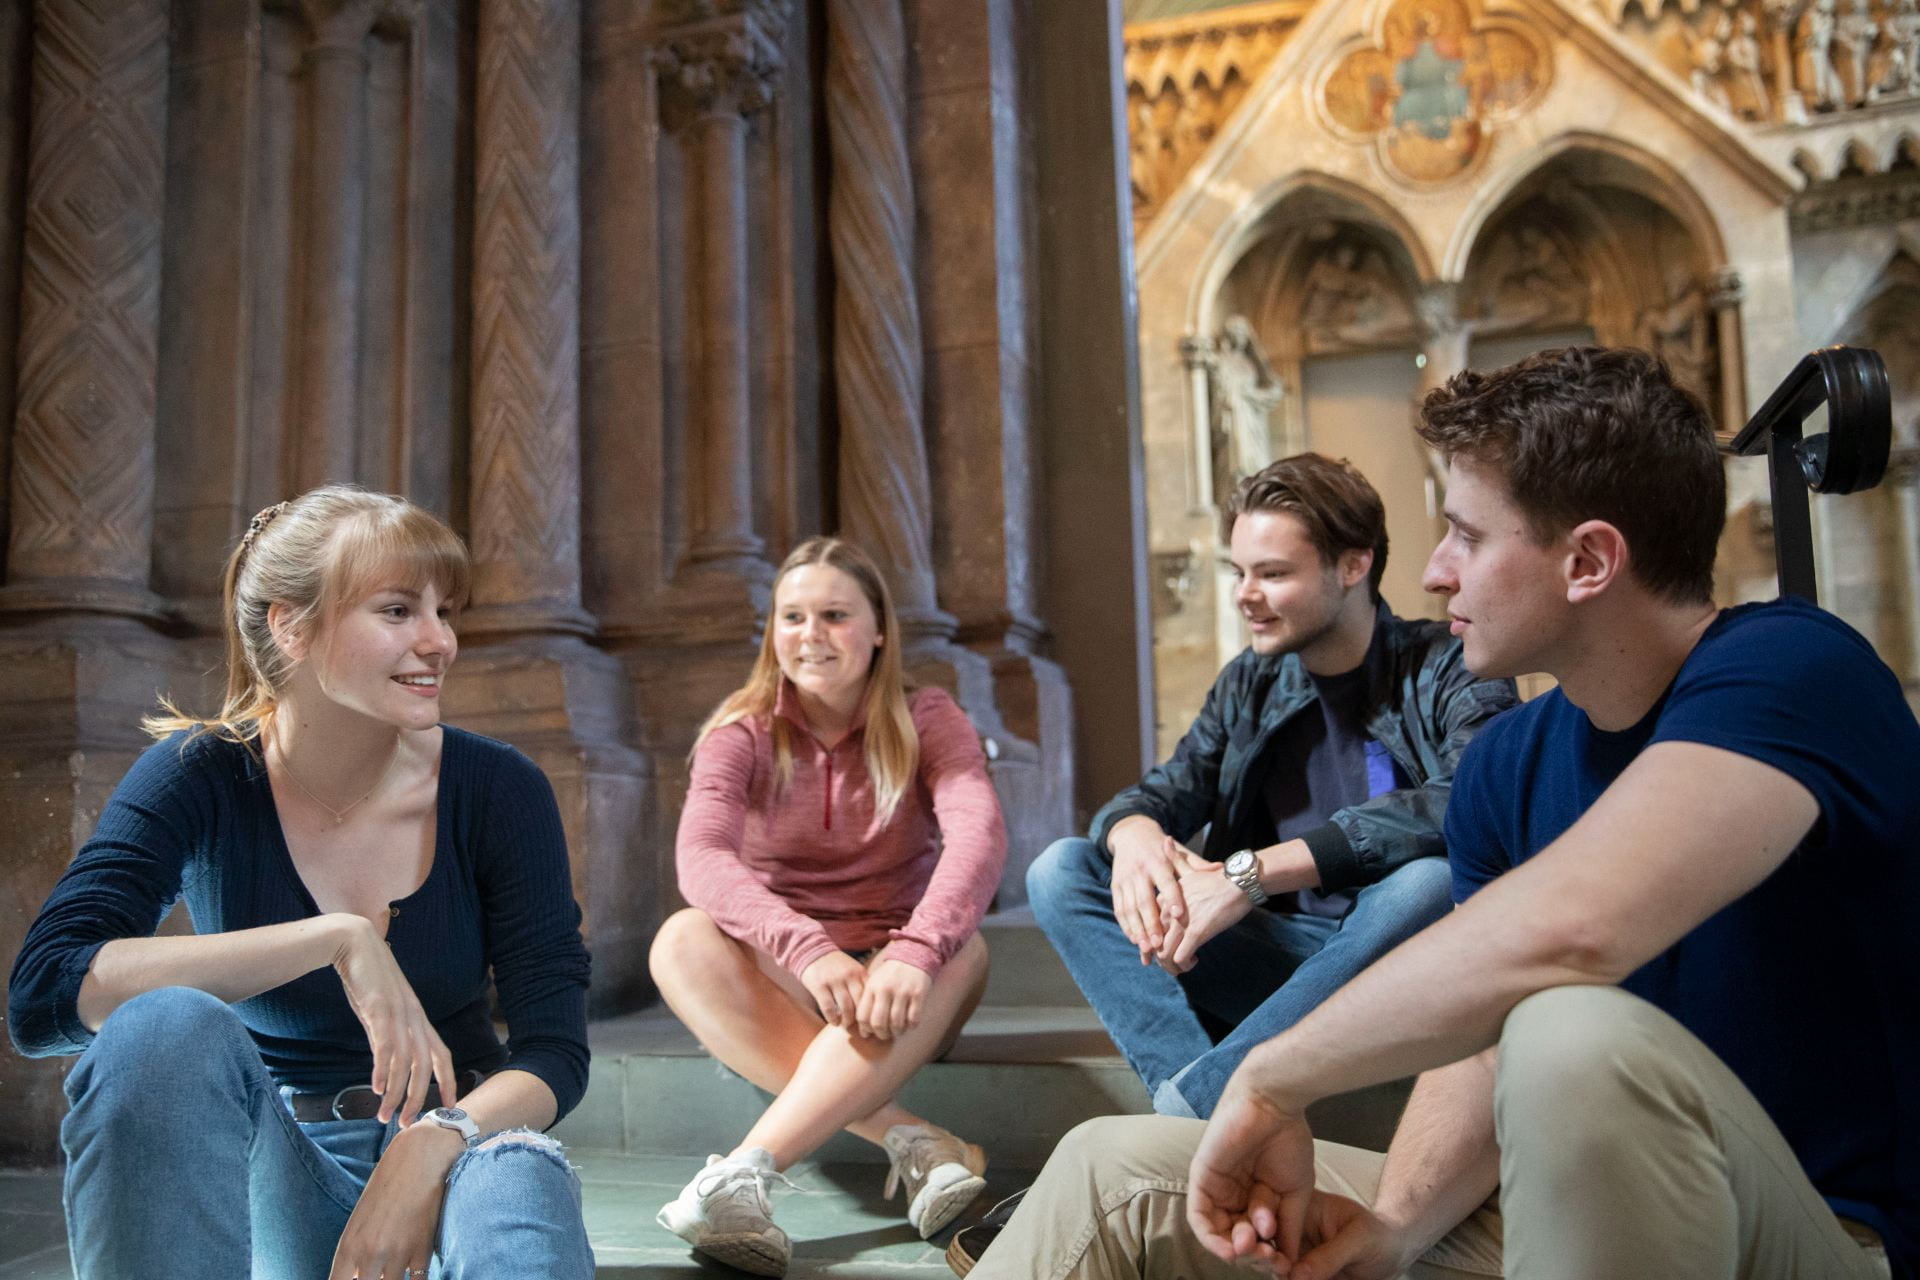 Celina Hollmichel '19, (from left) Lara Schenk '19, David Alexander '22, and Karl Oskar Schulz '22, Harvard students from Germany, speak about Angela Merkel, Chancellor of Germany who will be this year's commencement speaker. They are seen at The Minda de Gunzburg Center for European Studies (CES). Kris Snibbe/Harvard Staff Photographer